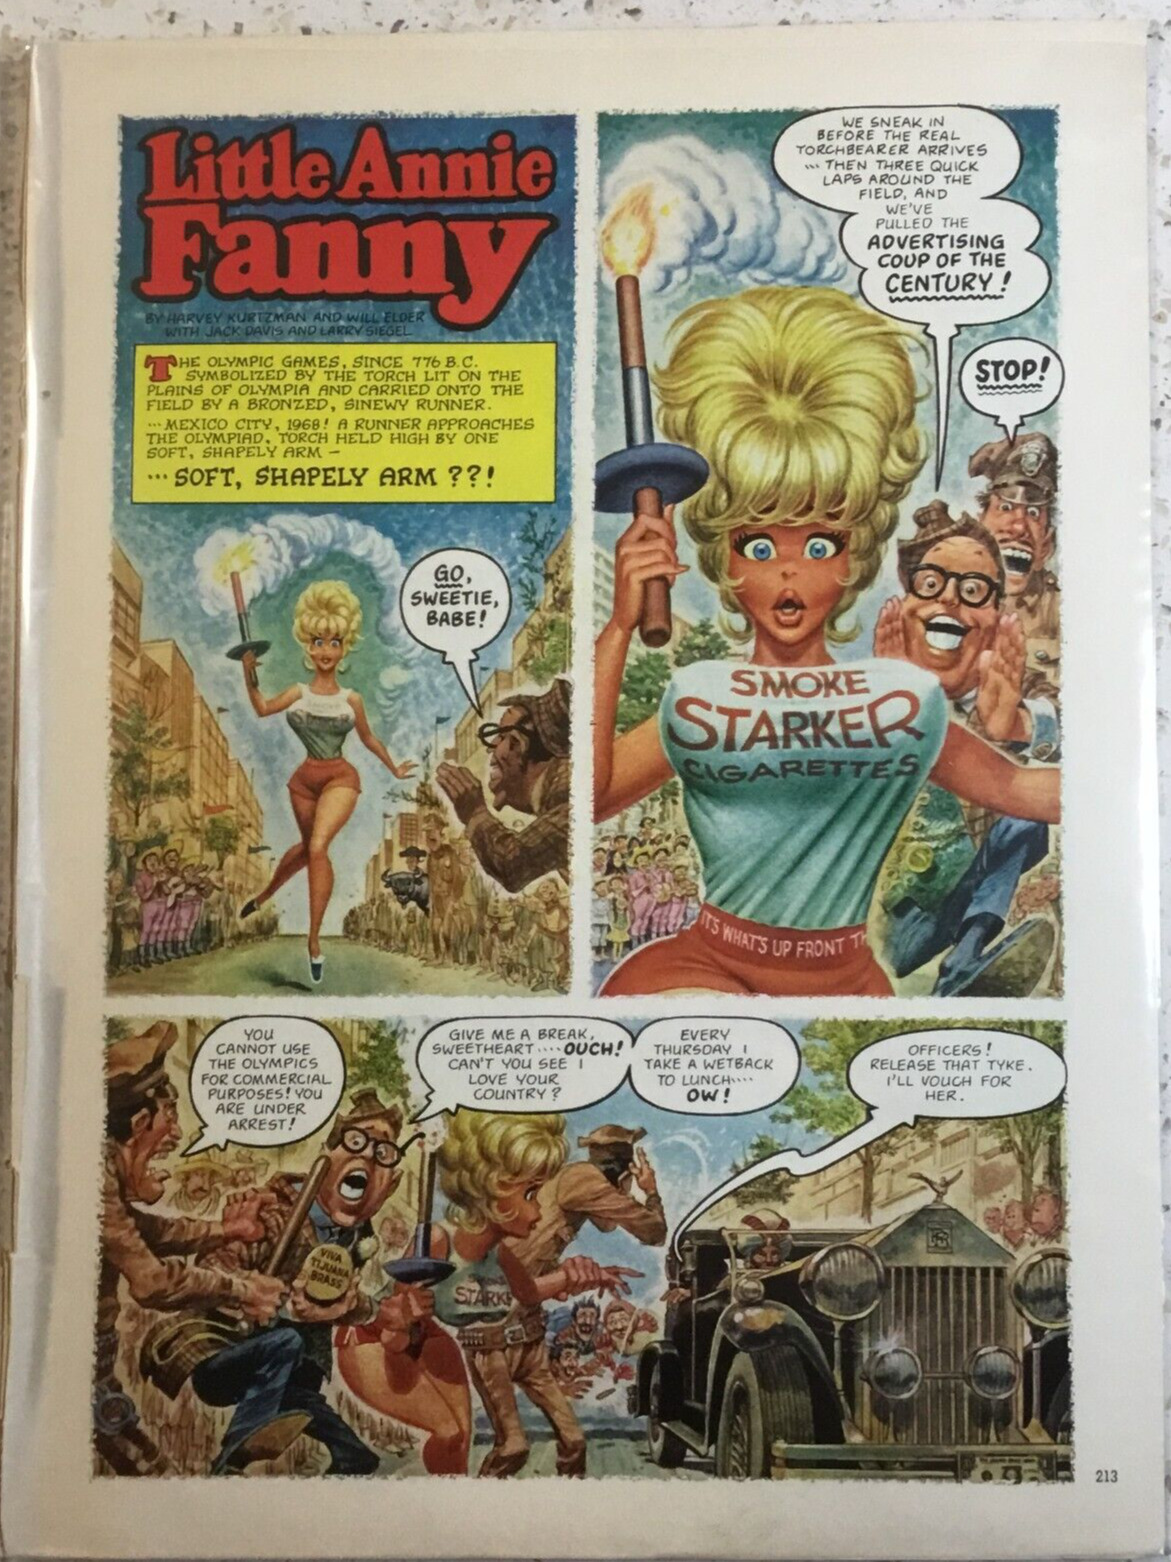 PLAYBOY MAGAZINE COMIC PAGES LITTLE ANNIE FANNY -ANNIE RUNS IN OLYMPICS W/TORCH